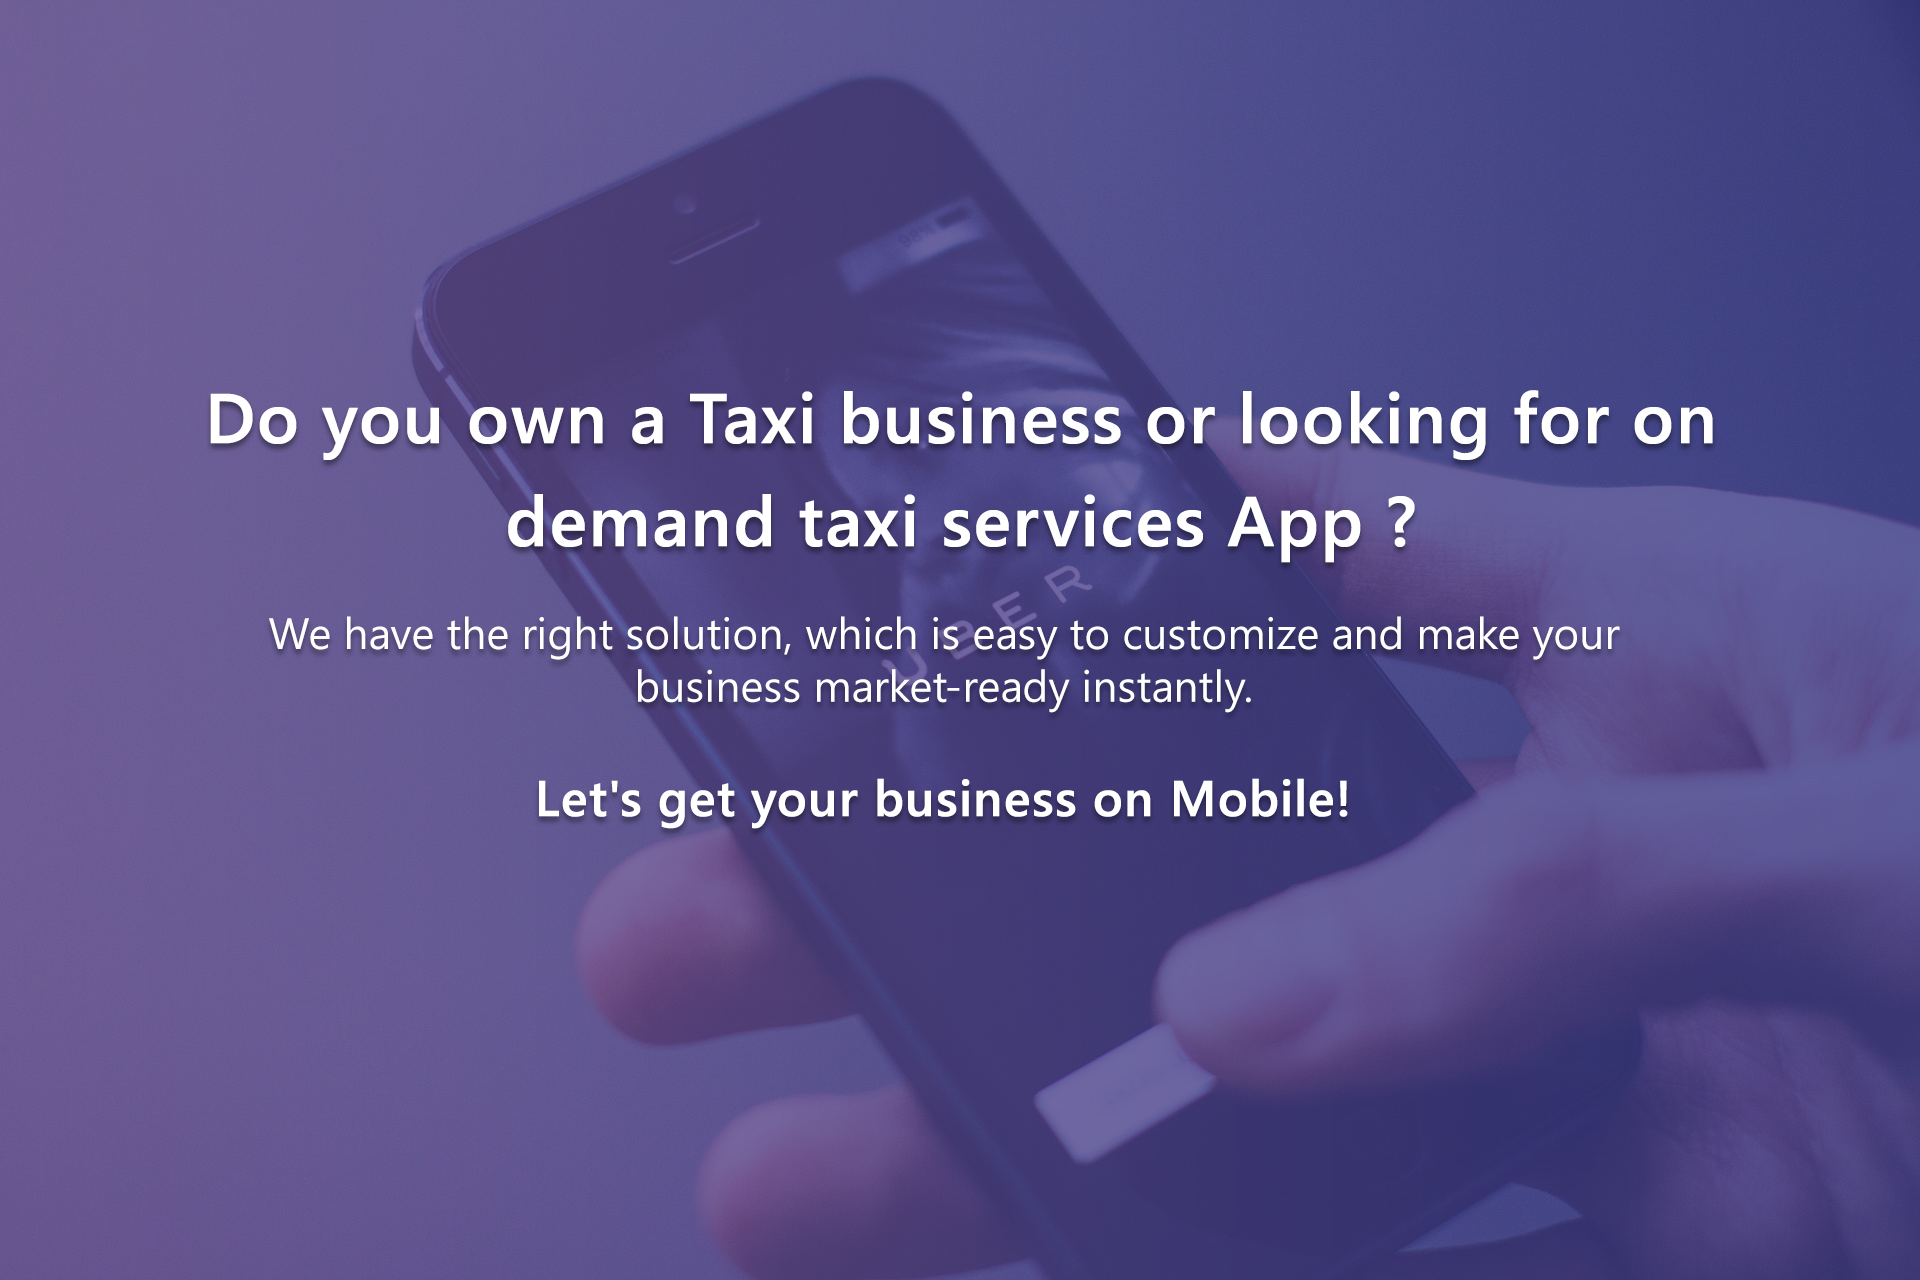 Looking for on Demand Taxi Services App